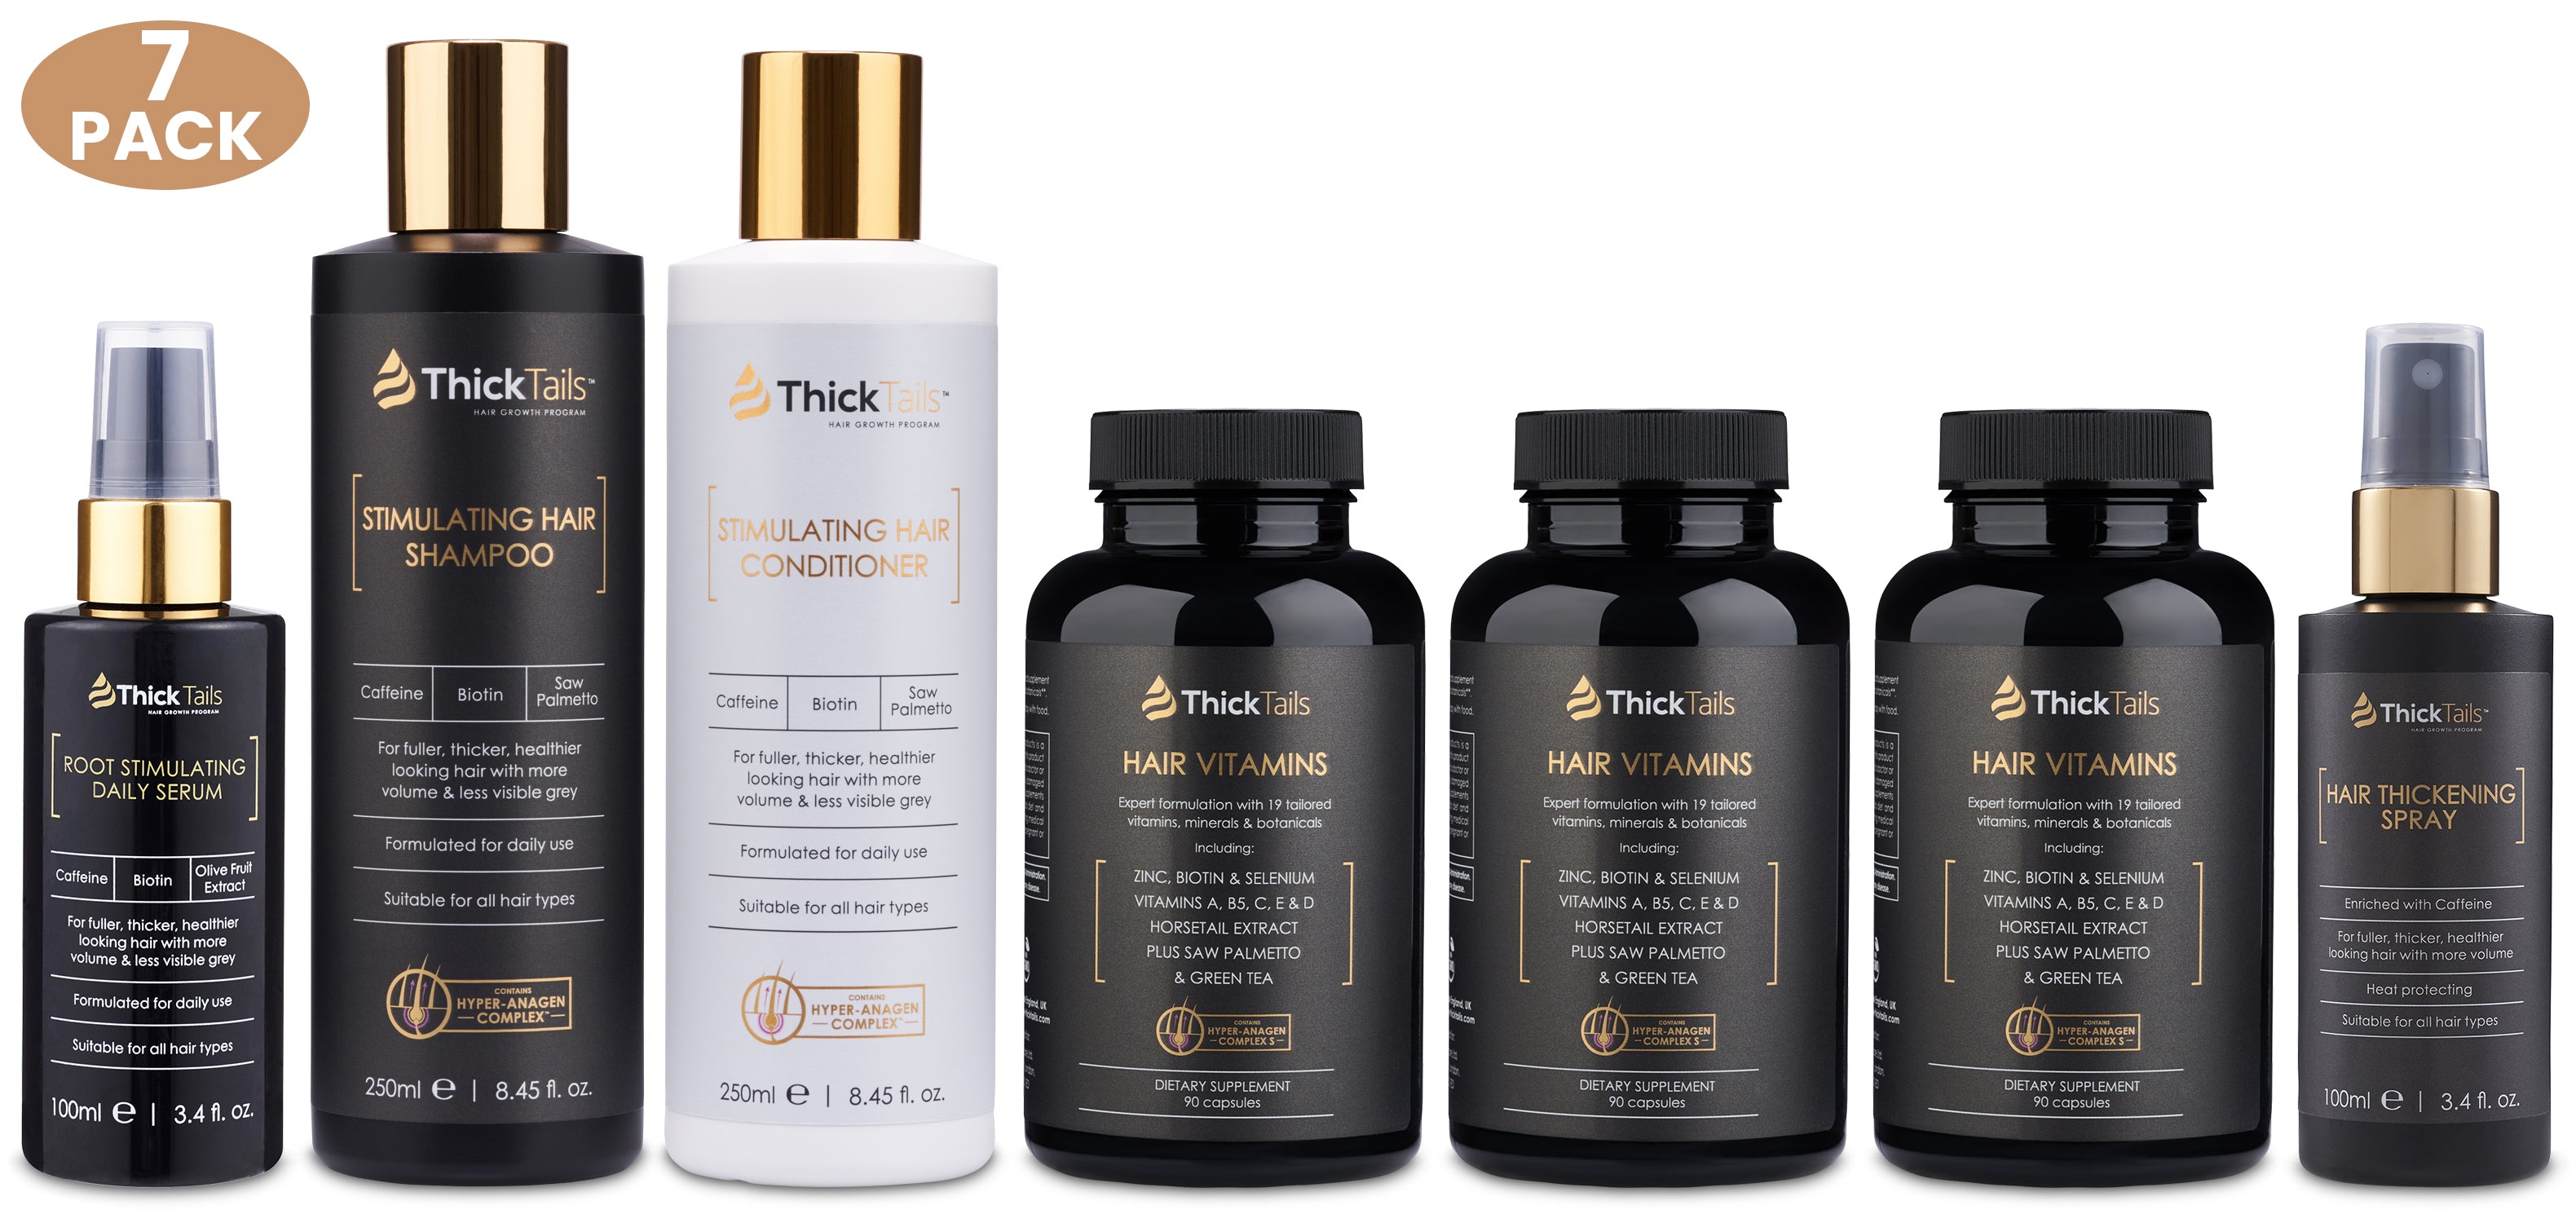 ThickTails Total 90-Day Hair Thickening System | 7-Pack | Save $60